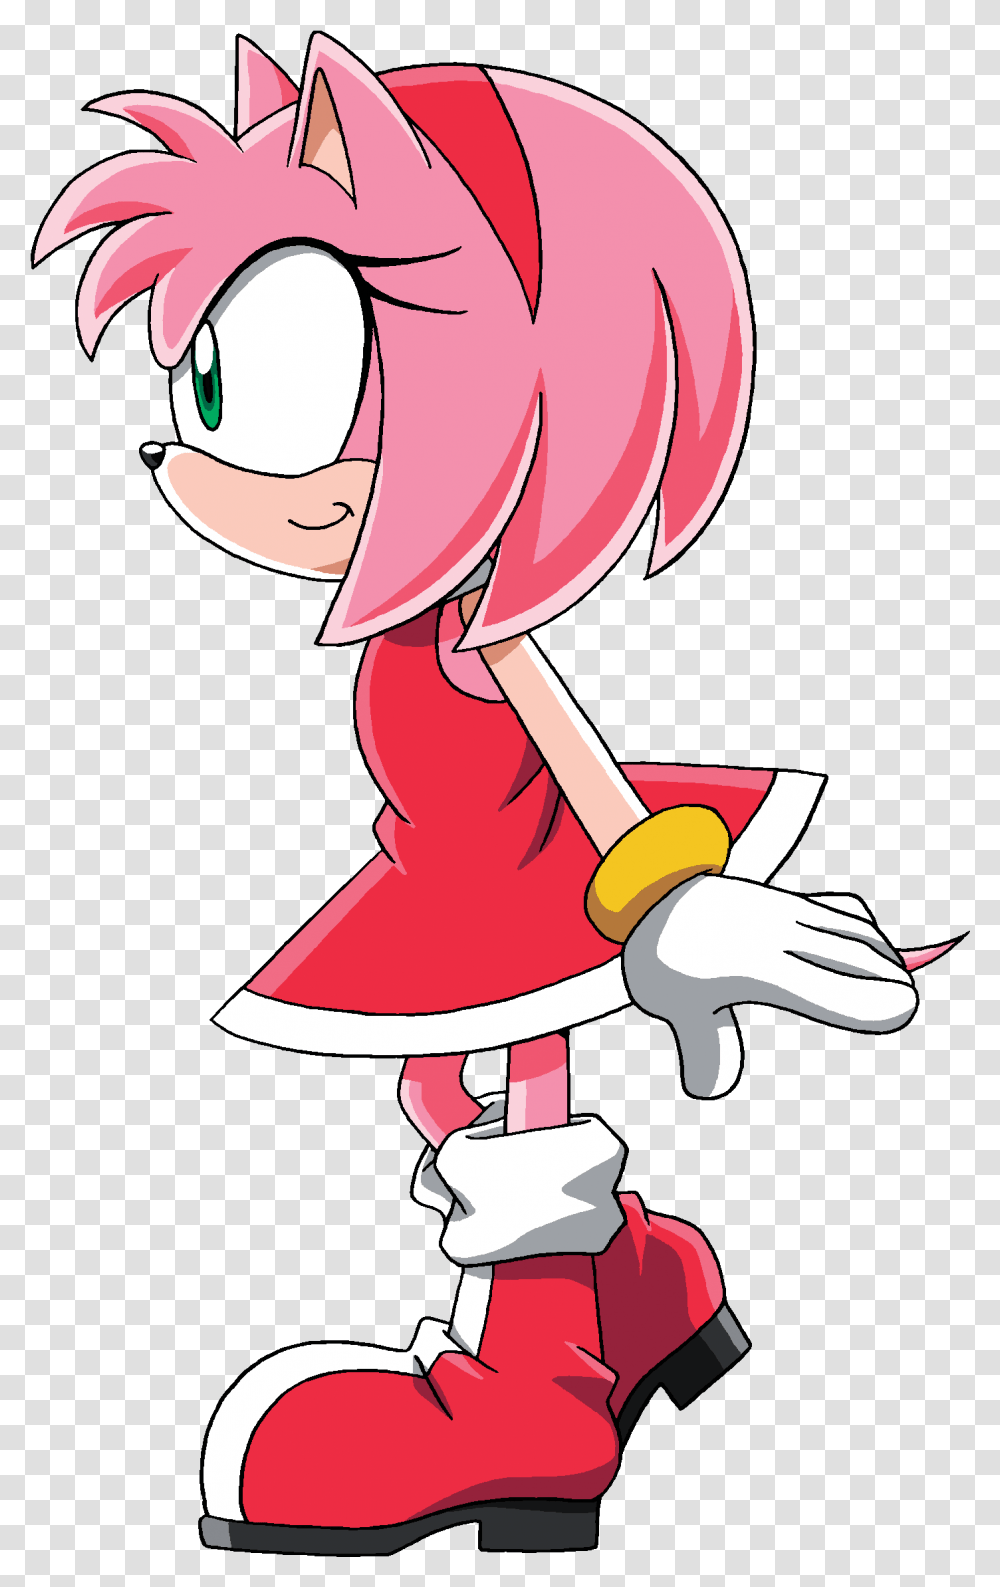 Download Sonic X Glance Left Amy Rose And Knuckles Hd Sonic X Amy Rose, Performer, Graphics, Art Transparent Png